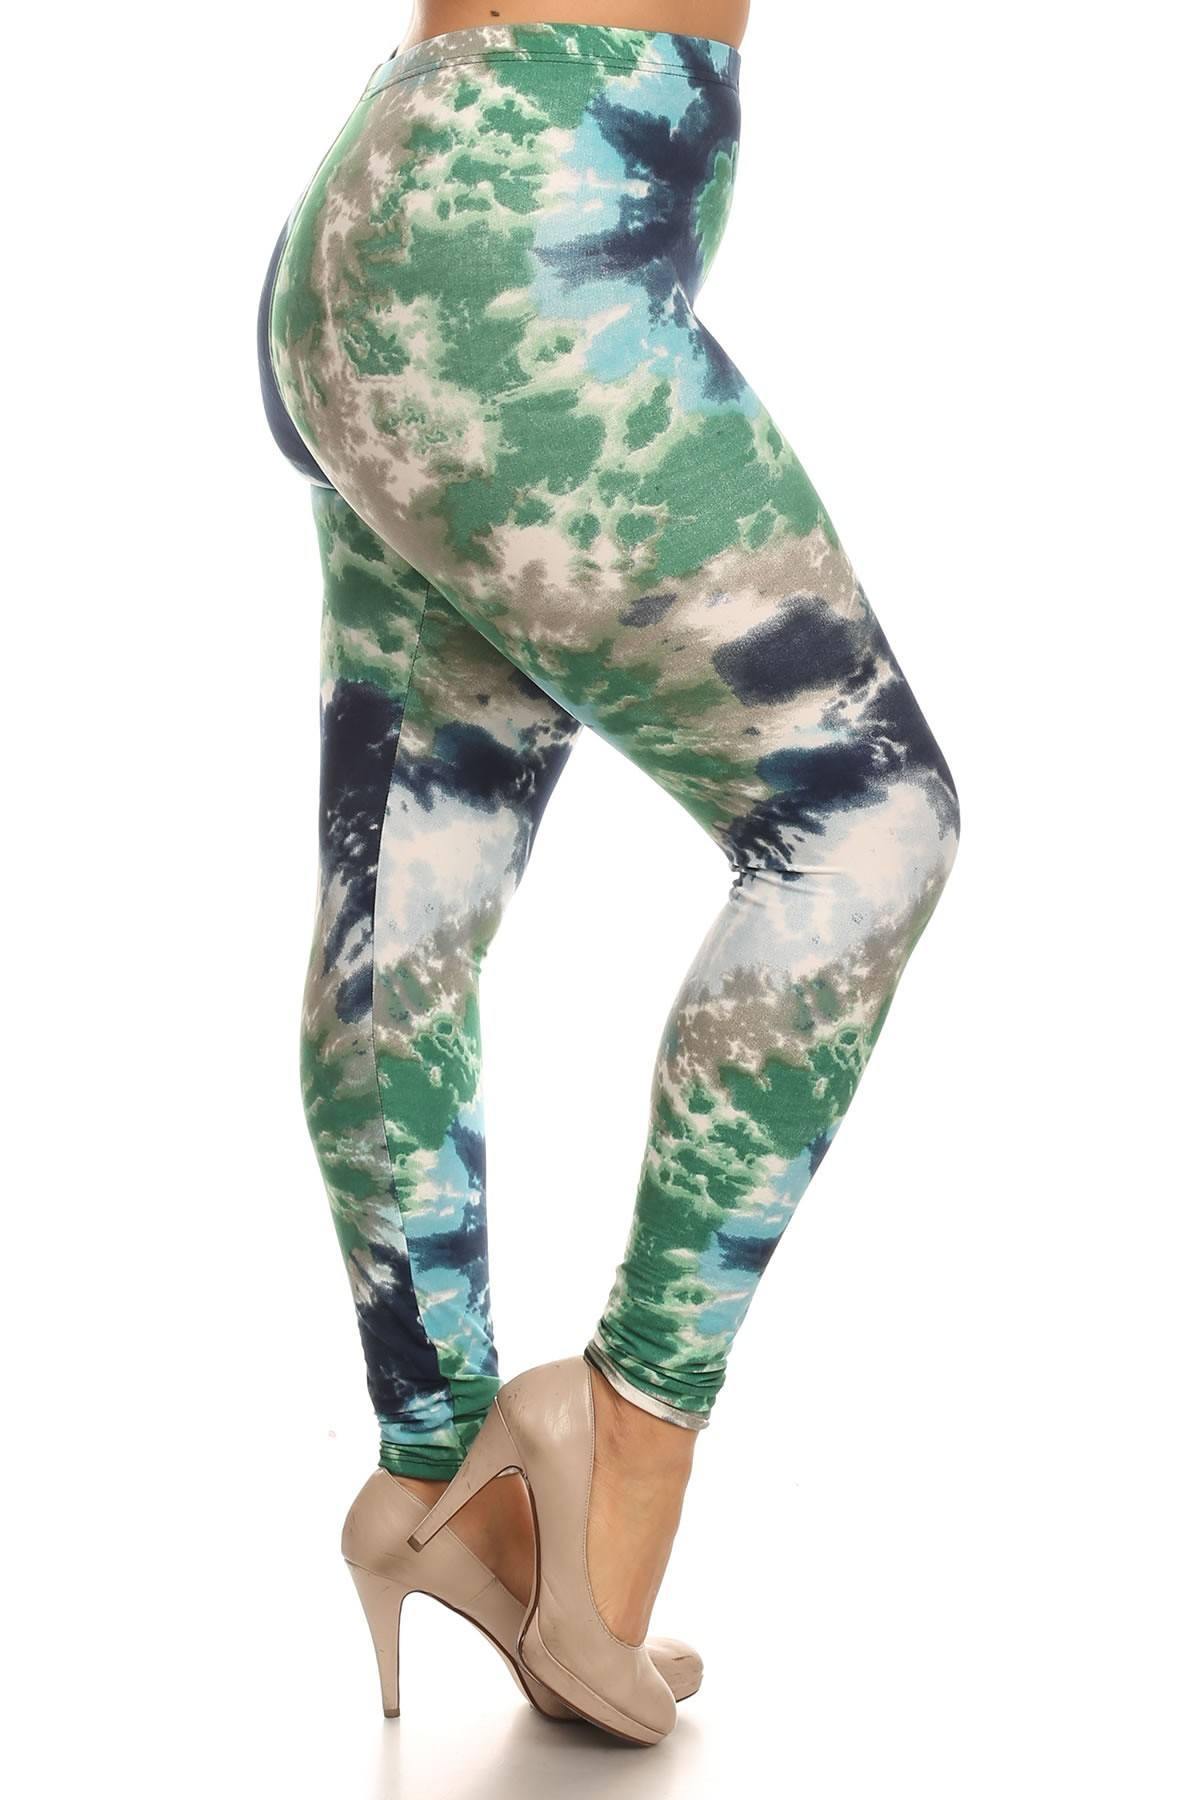 Plus Size Tie Dye Print, Full Length Leggings In A Fitted Style With A Banded High Waist - Pearlara